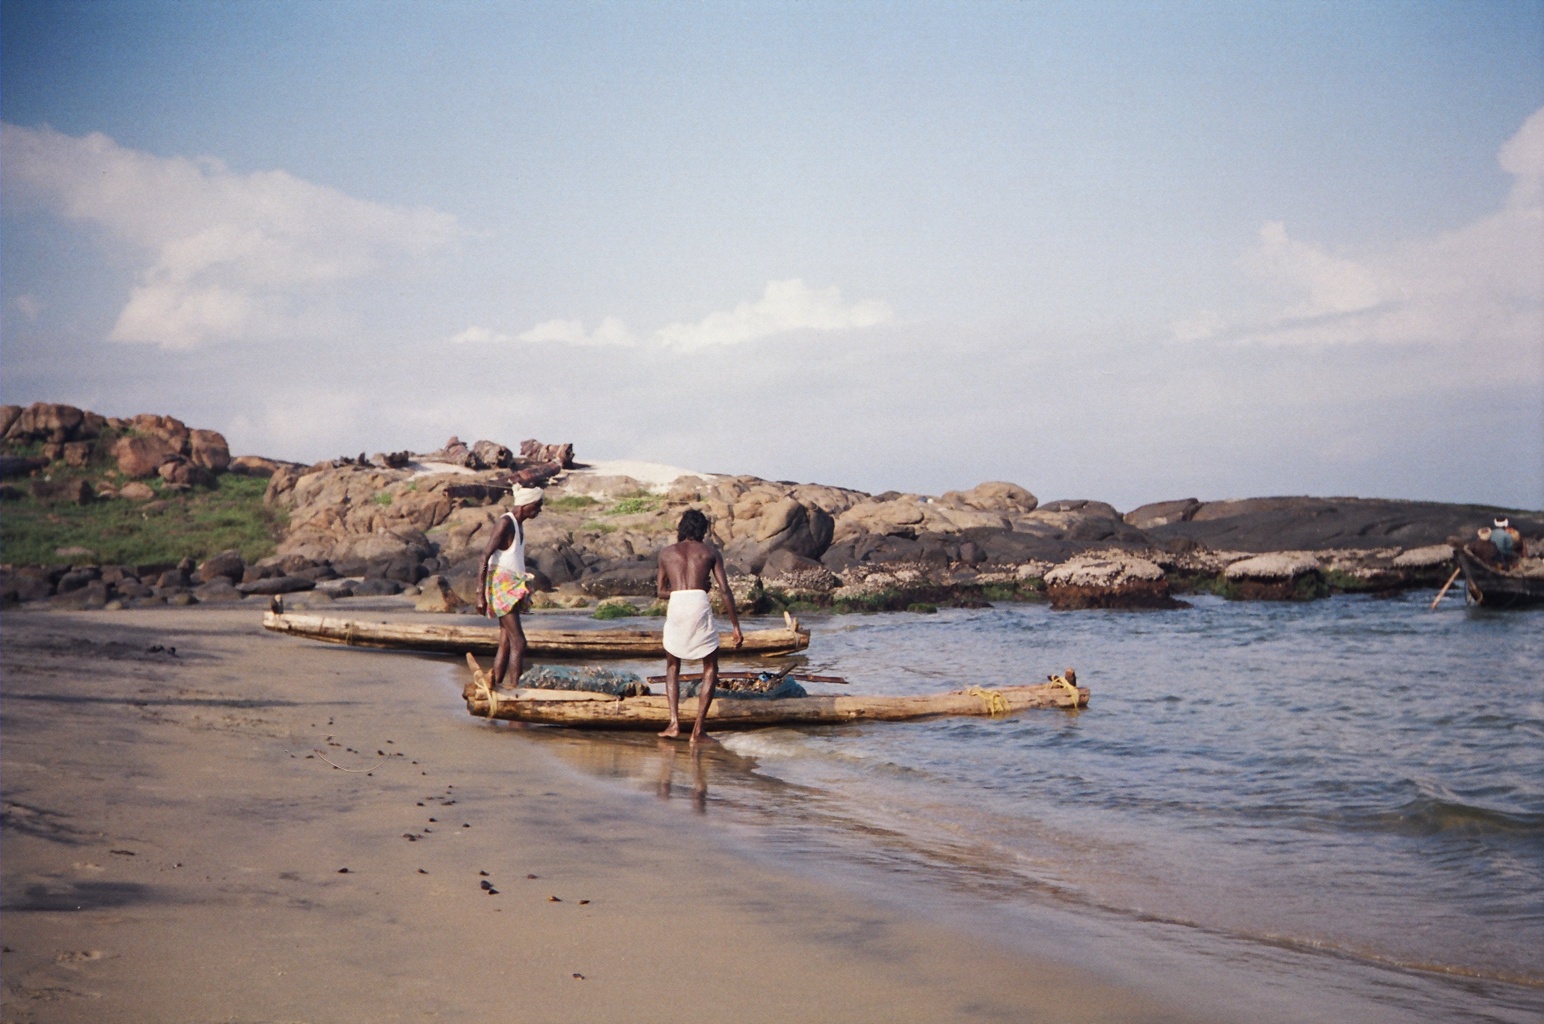 A fisherman with his traditional boat